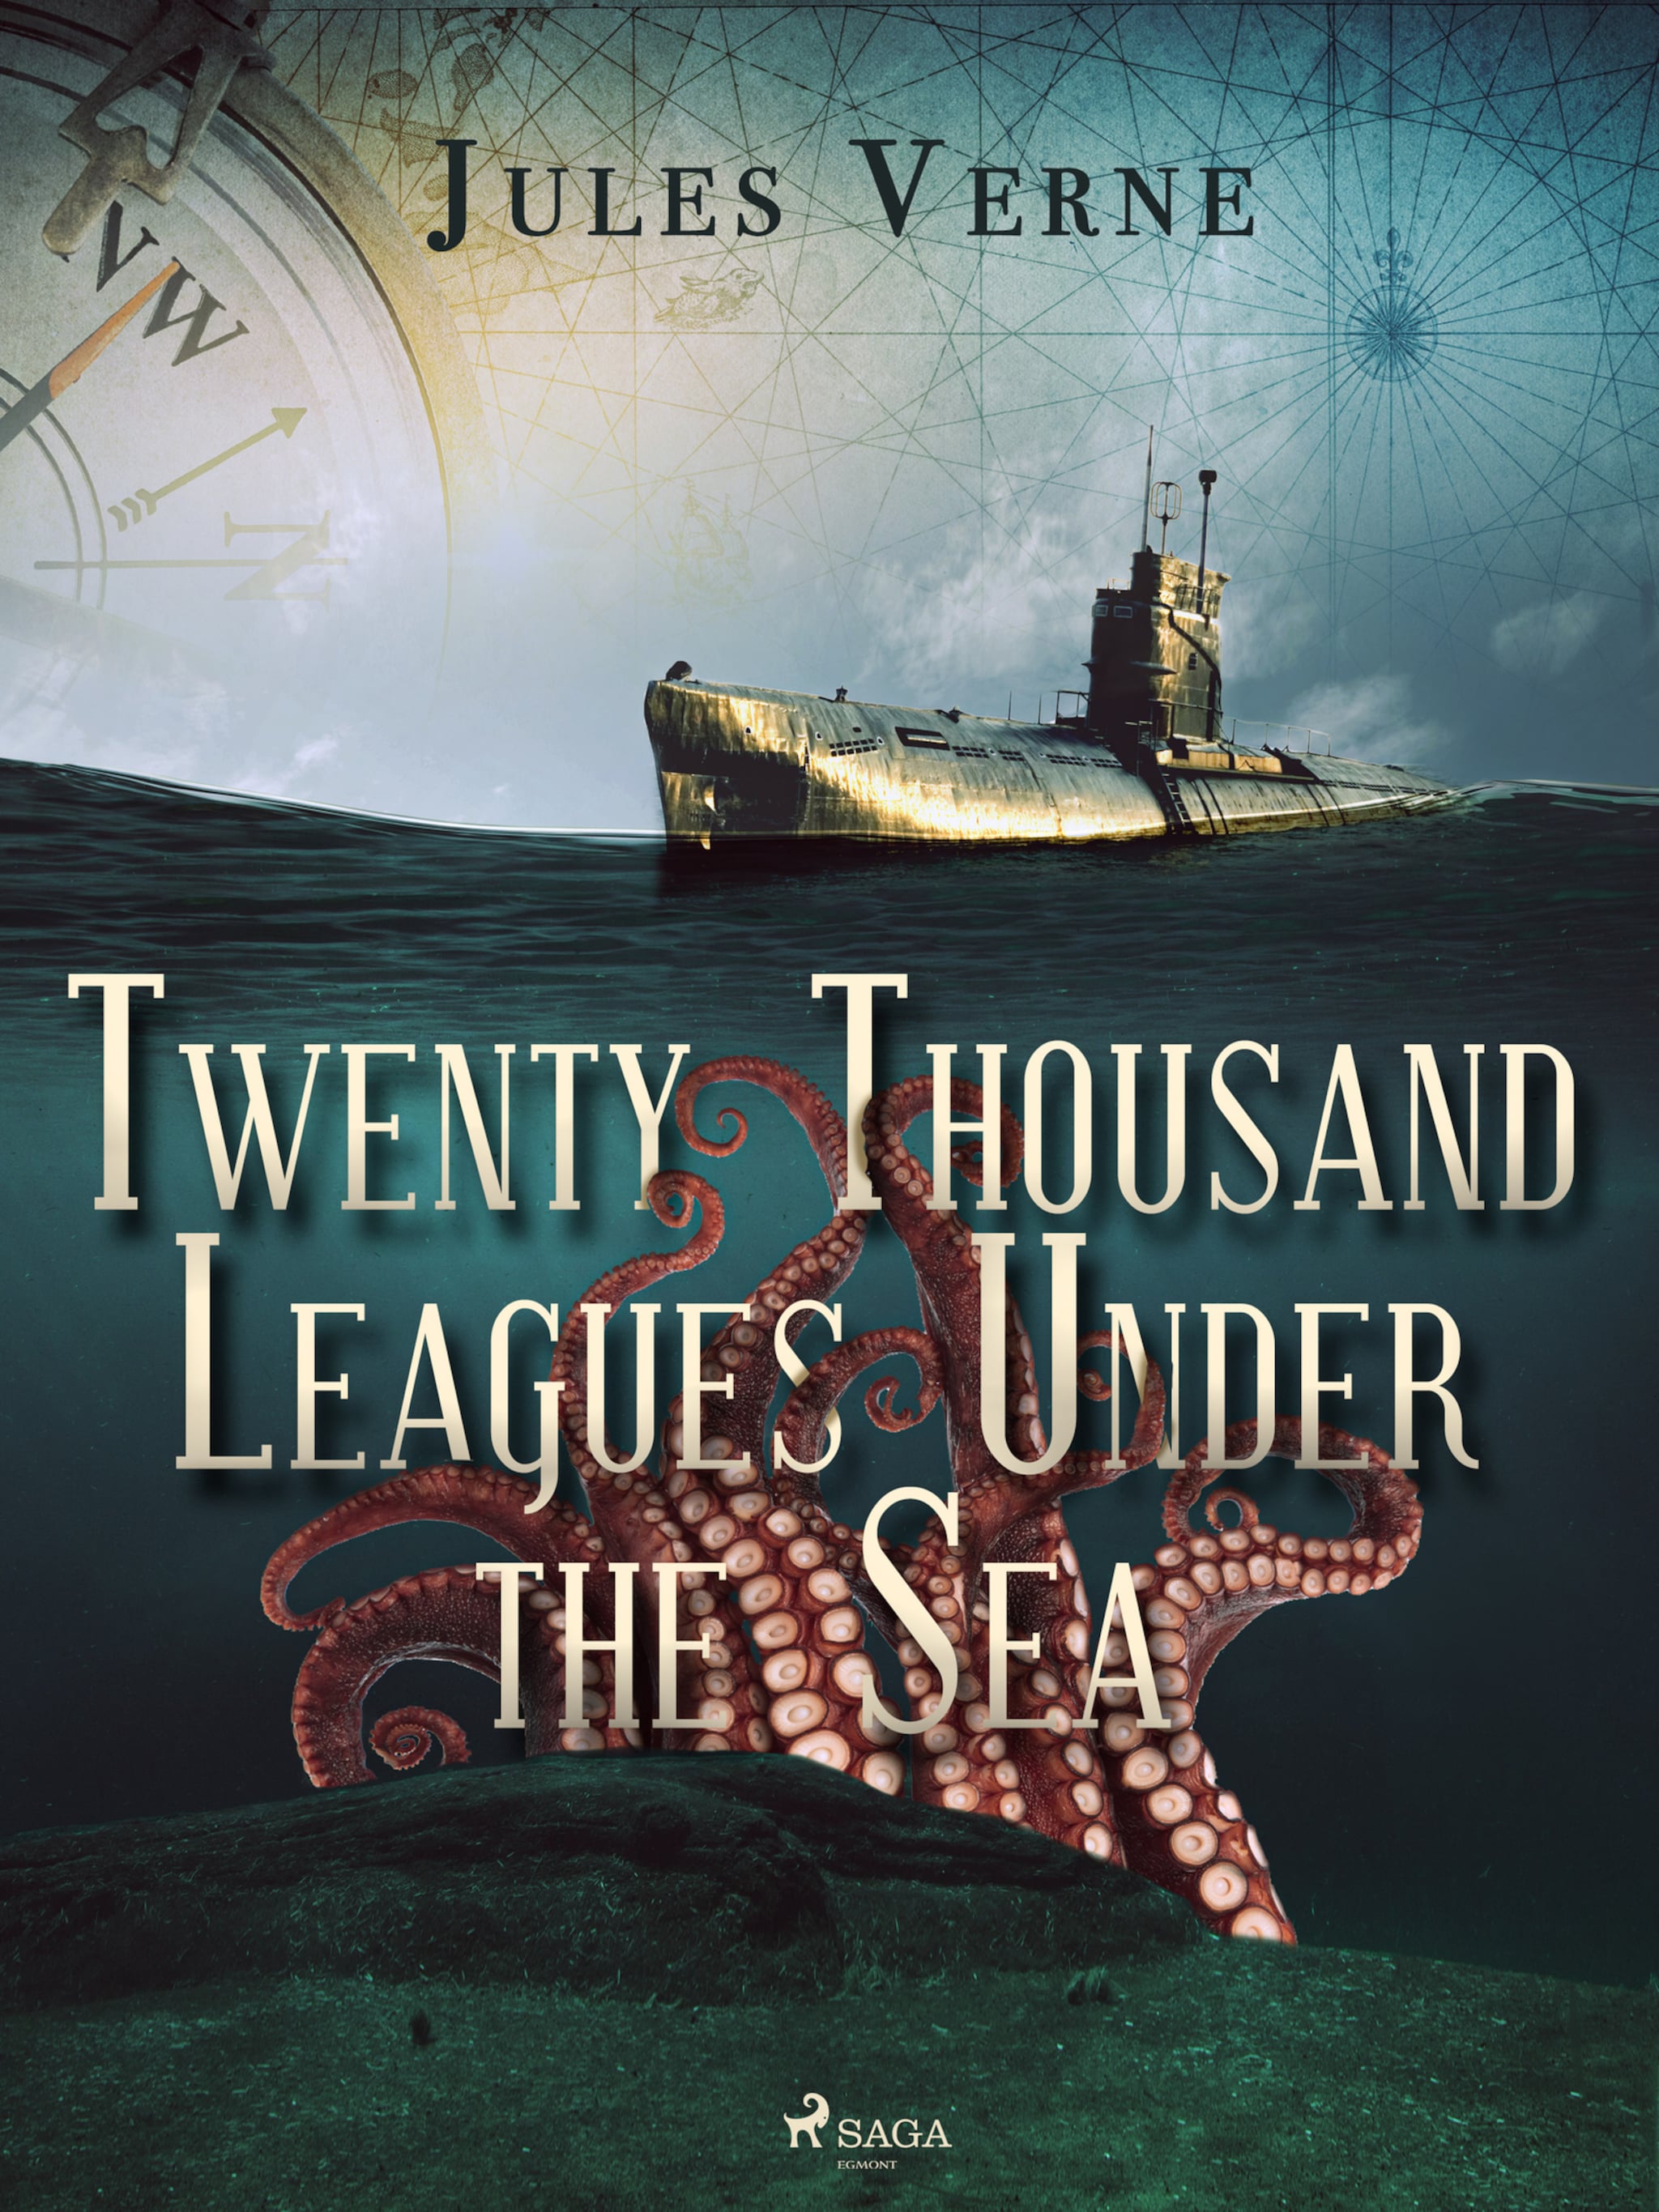 20000 leagues under the sea book